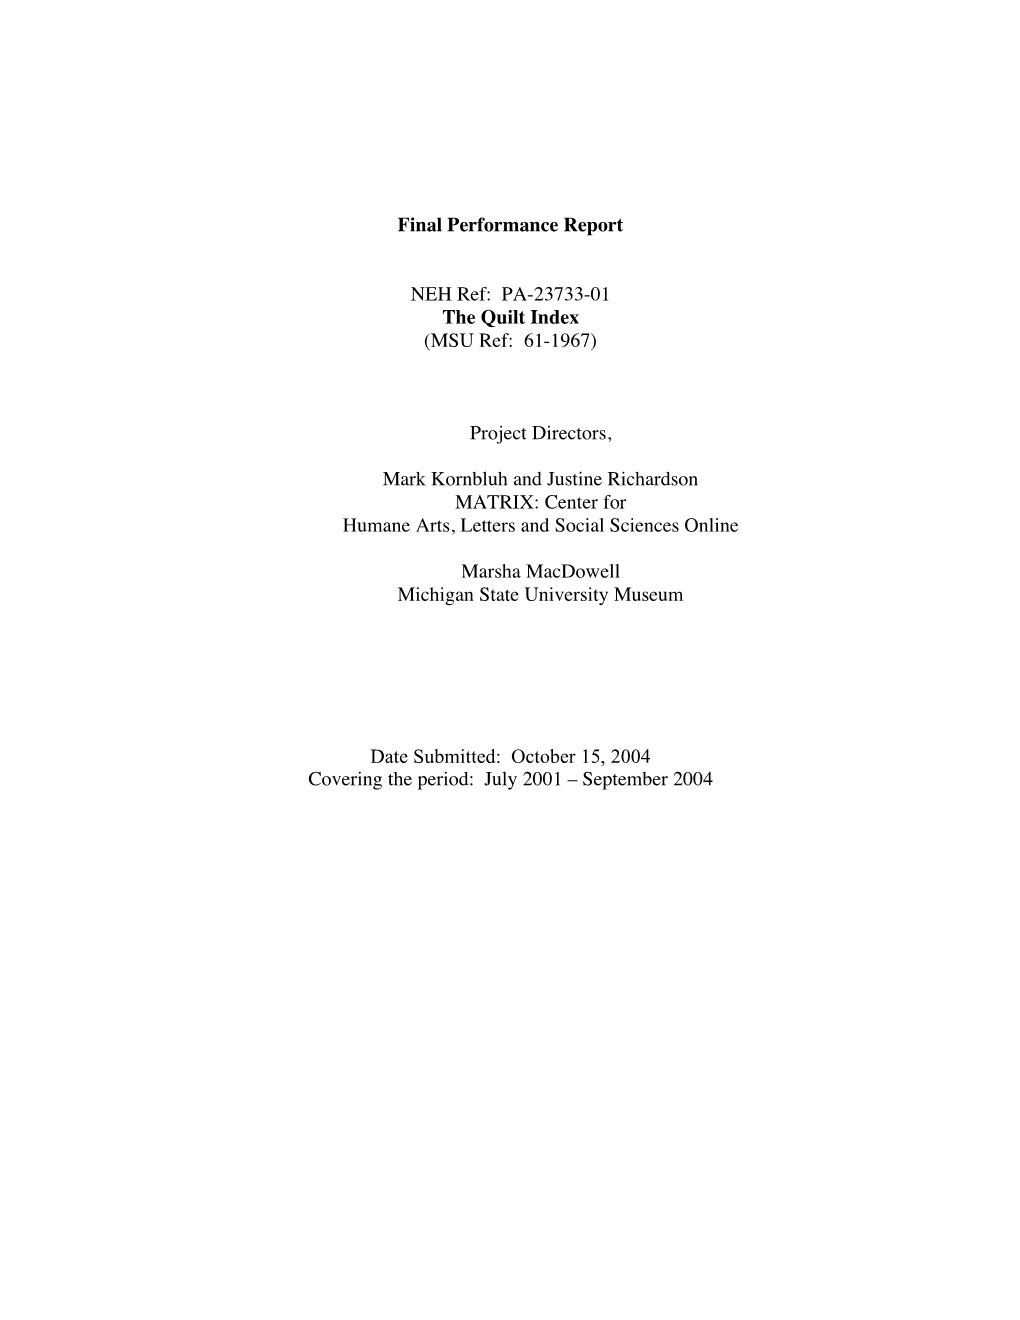 Final Performance Report NEH Ref: PA-23733-01 the Quilt Index